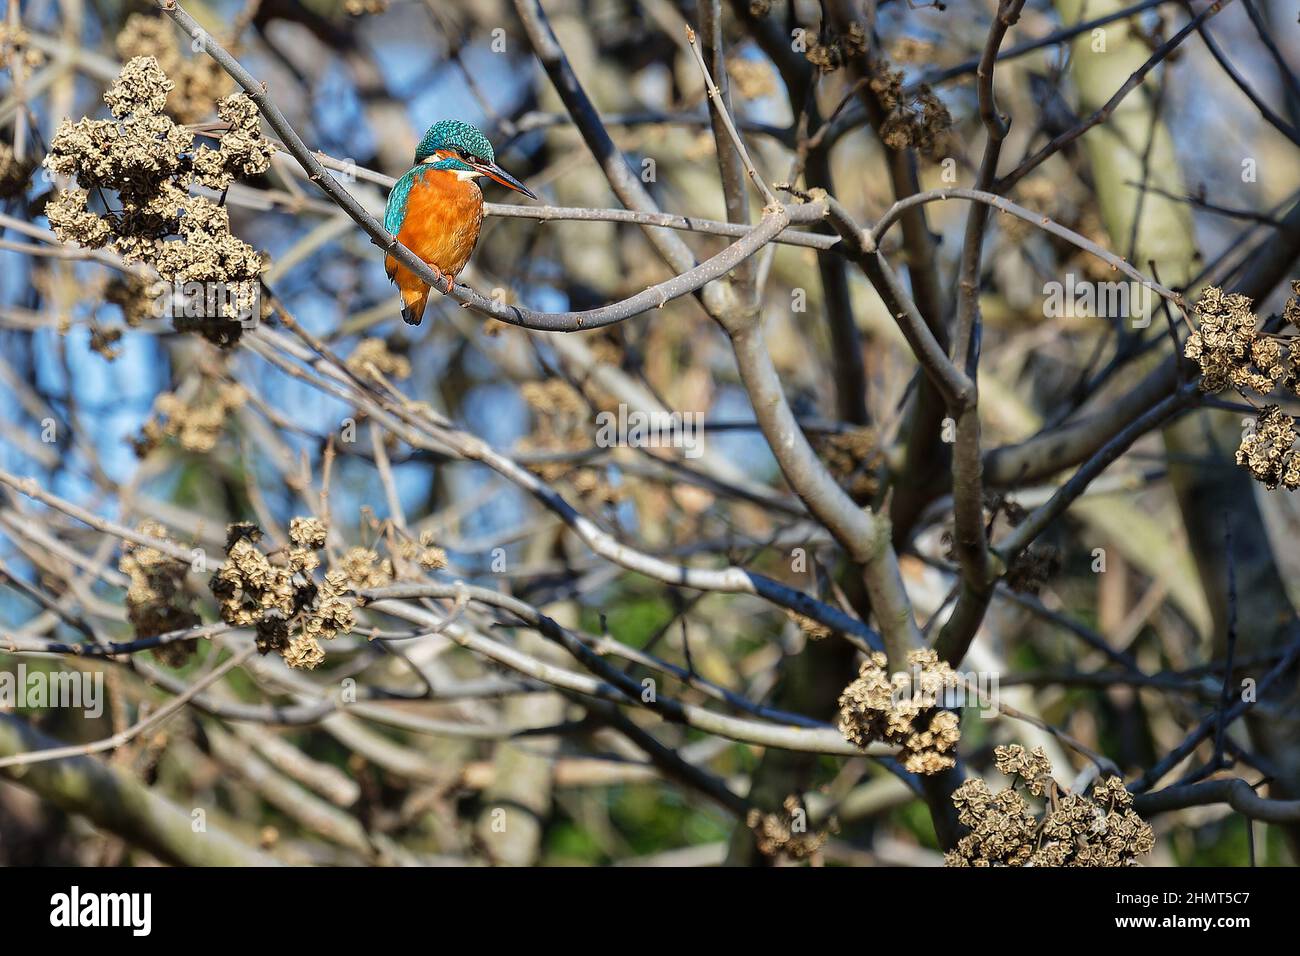 Kingfisher on its branch Stock Photo